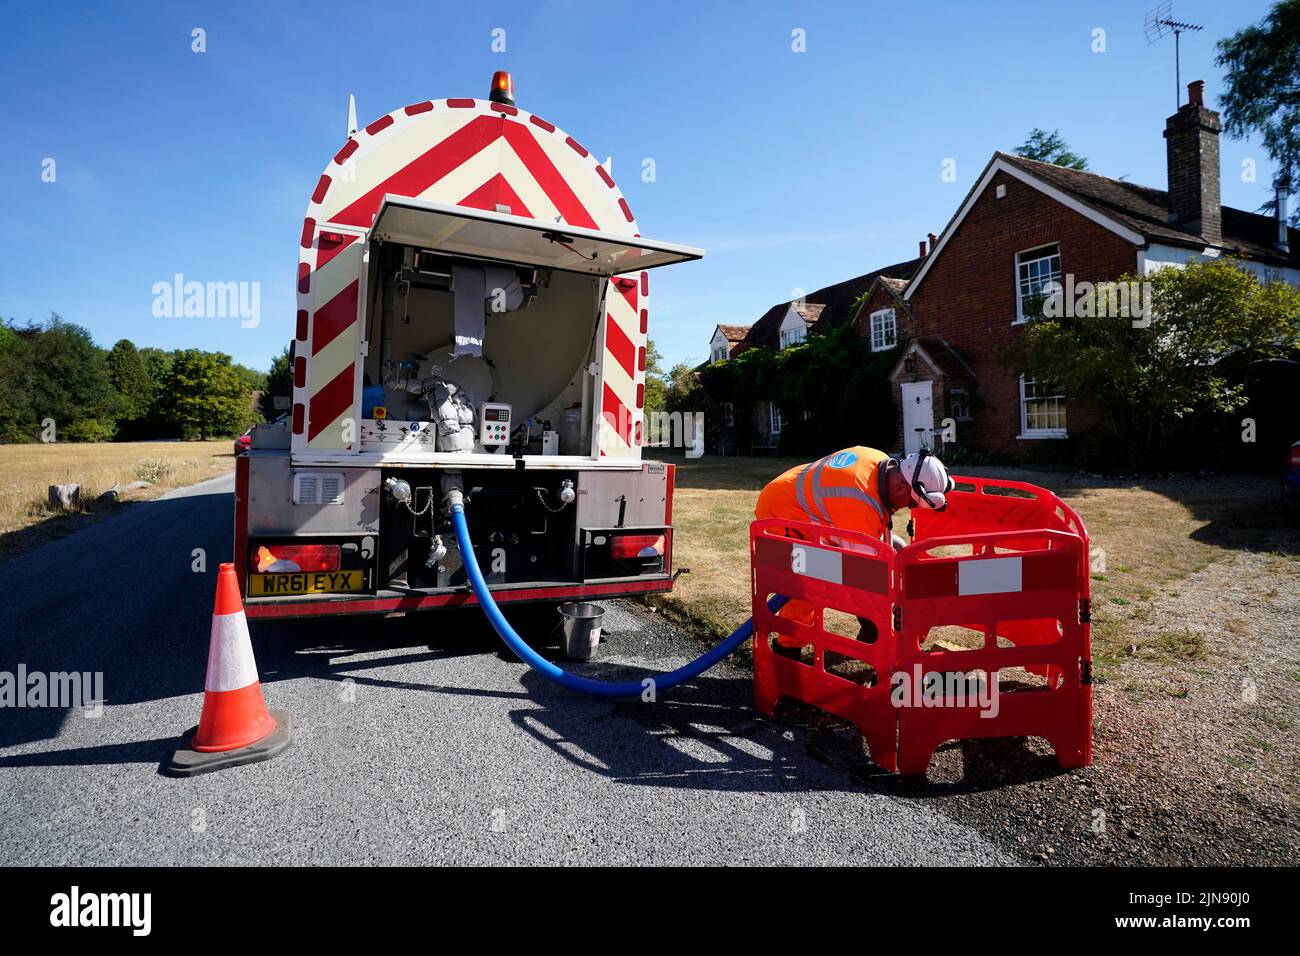 A worker from Thames Water delivering a temporary water supply from a tanker to the village of Northend in Oxfordshire, where the water company is pumping water into the supply network following a technical issue at Stokenchurch Reservoir in Oxfordshire. TPicture date: Wednesday August 10, 2022. Stock Photo